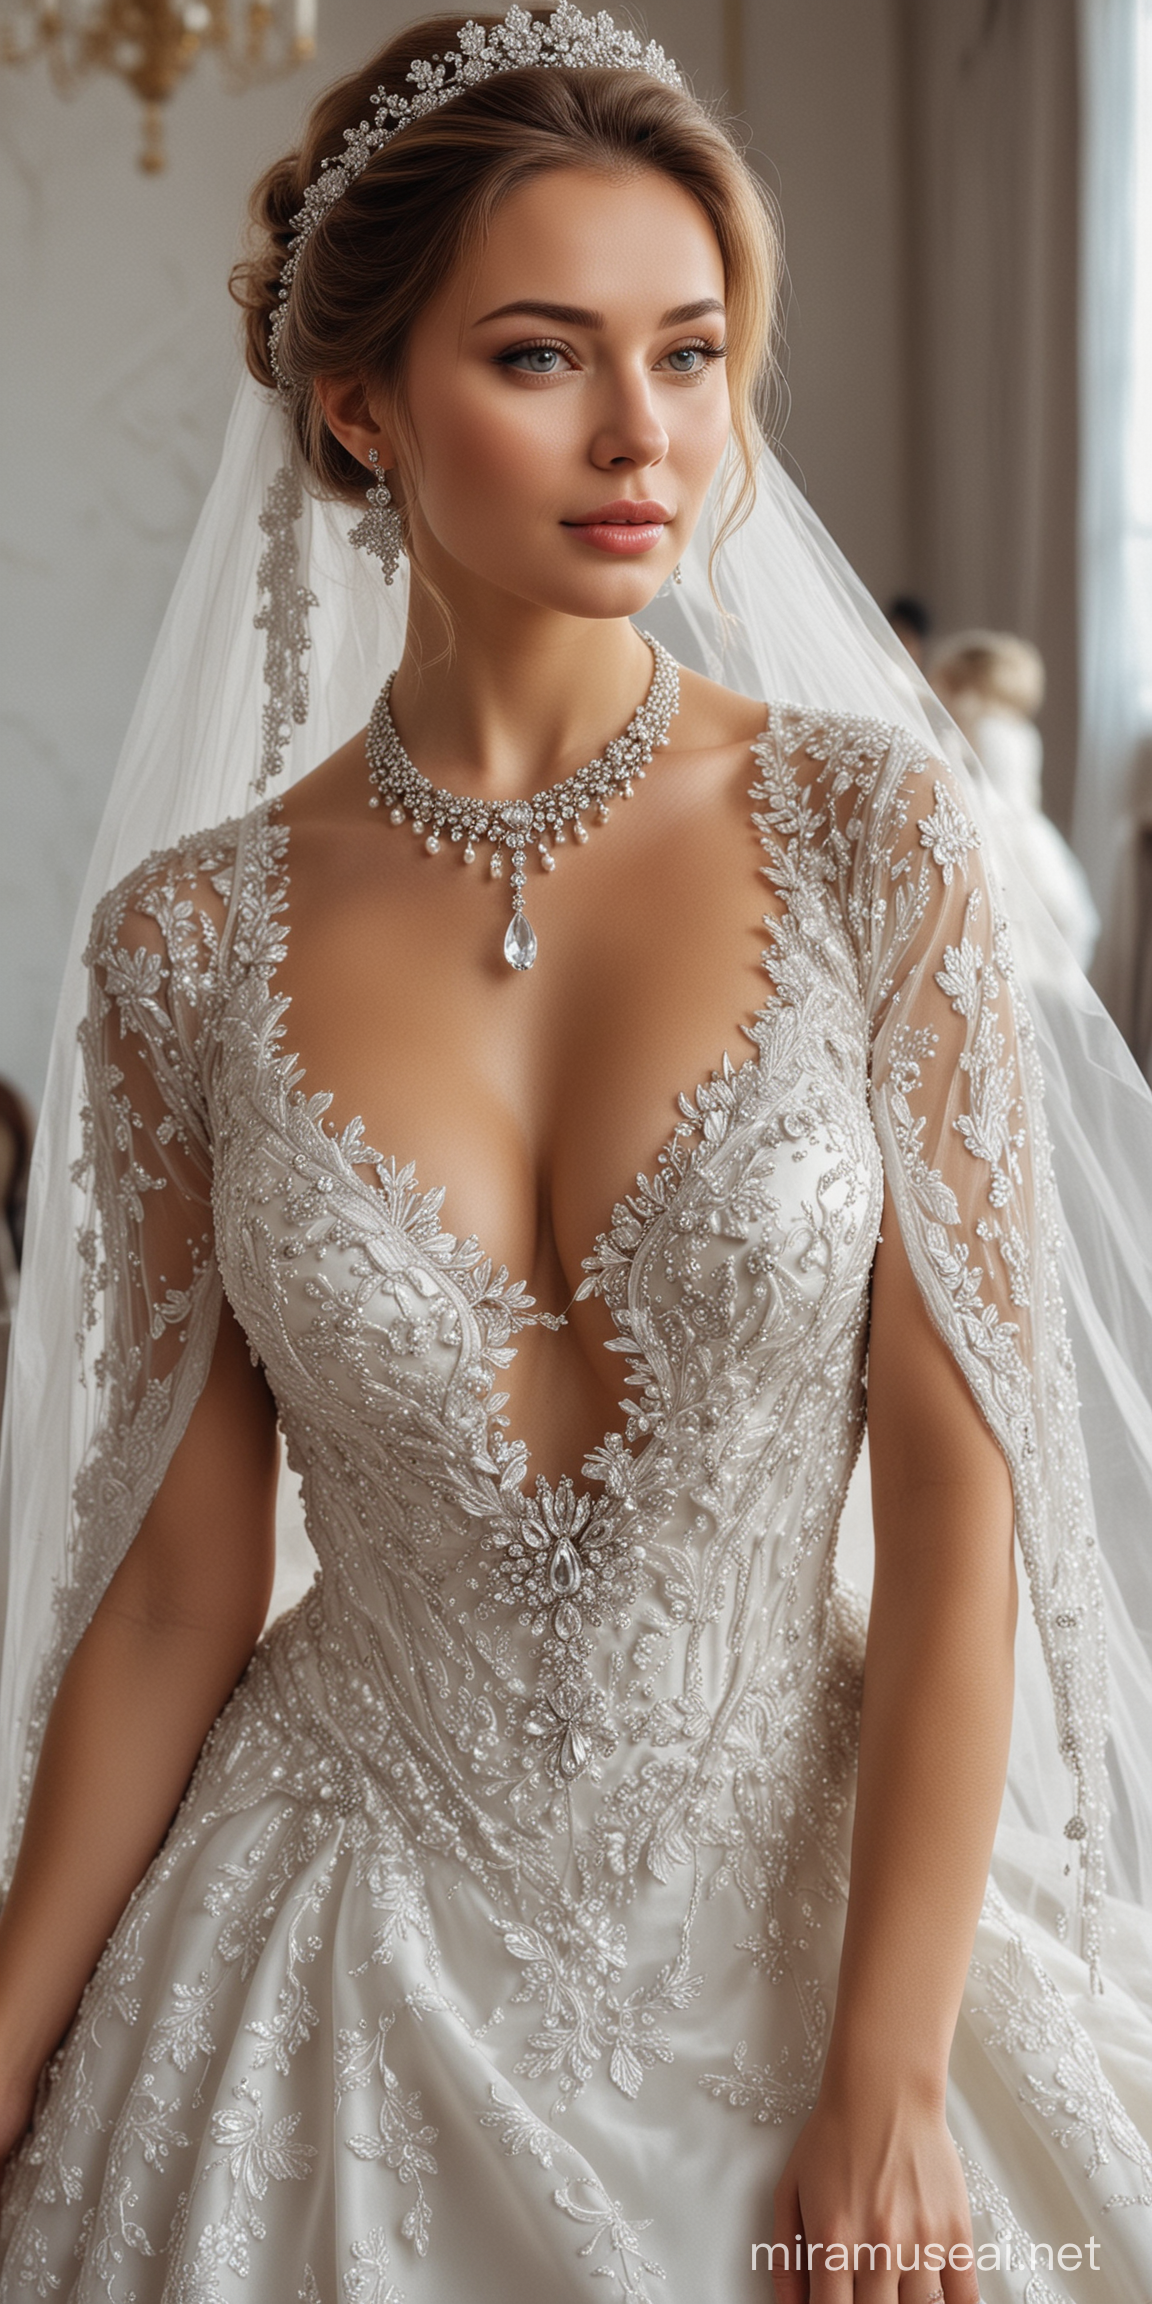 admiring the beauty of this masterpiece, a stunning russian woman with big breast and white wedding dress with jewellery.